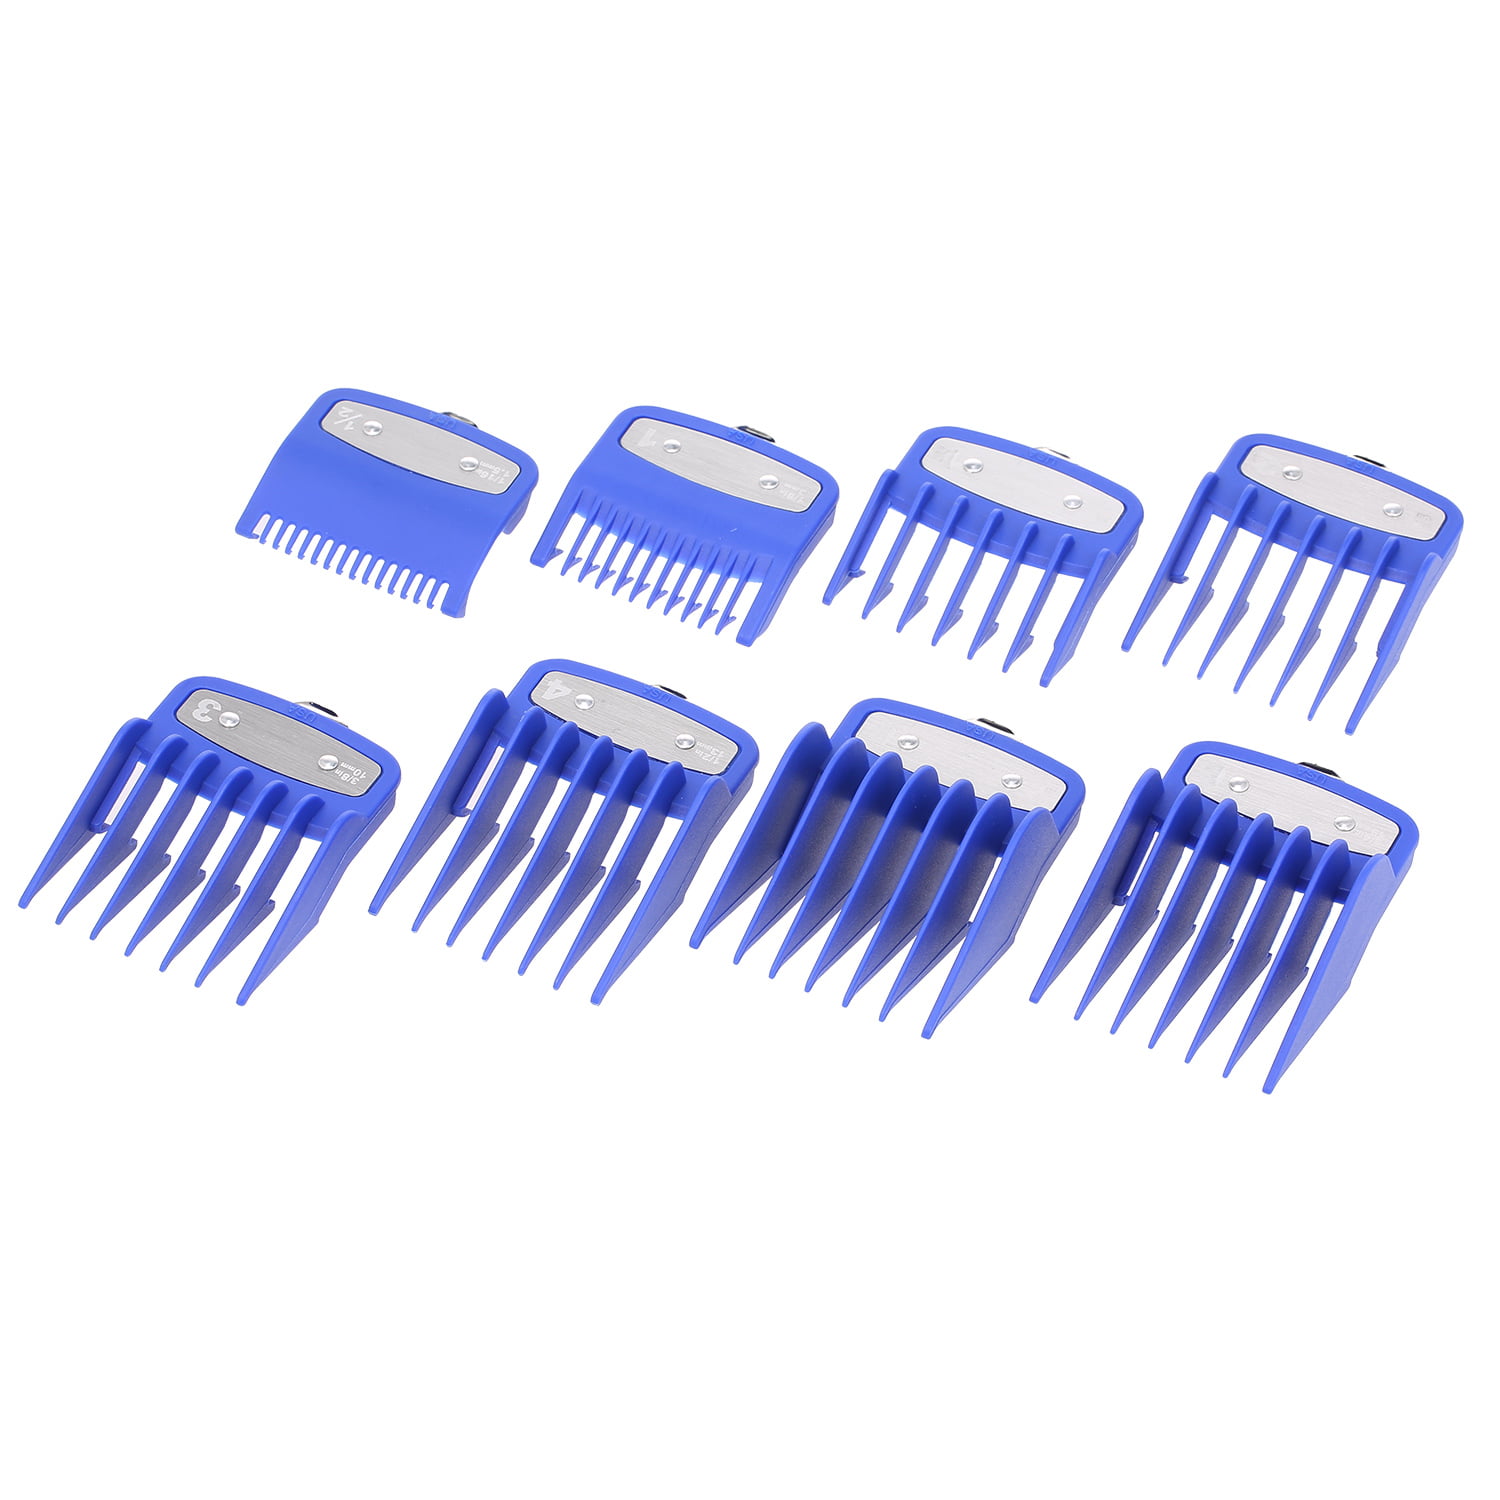 hair clipper guide comb sizes